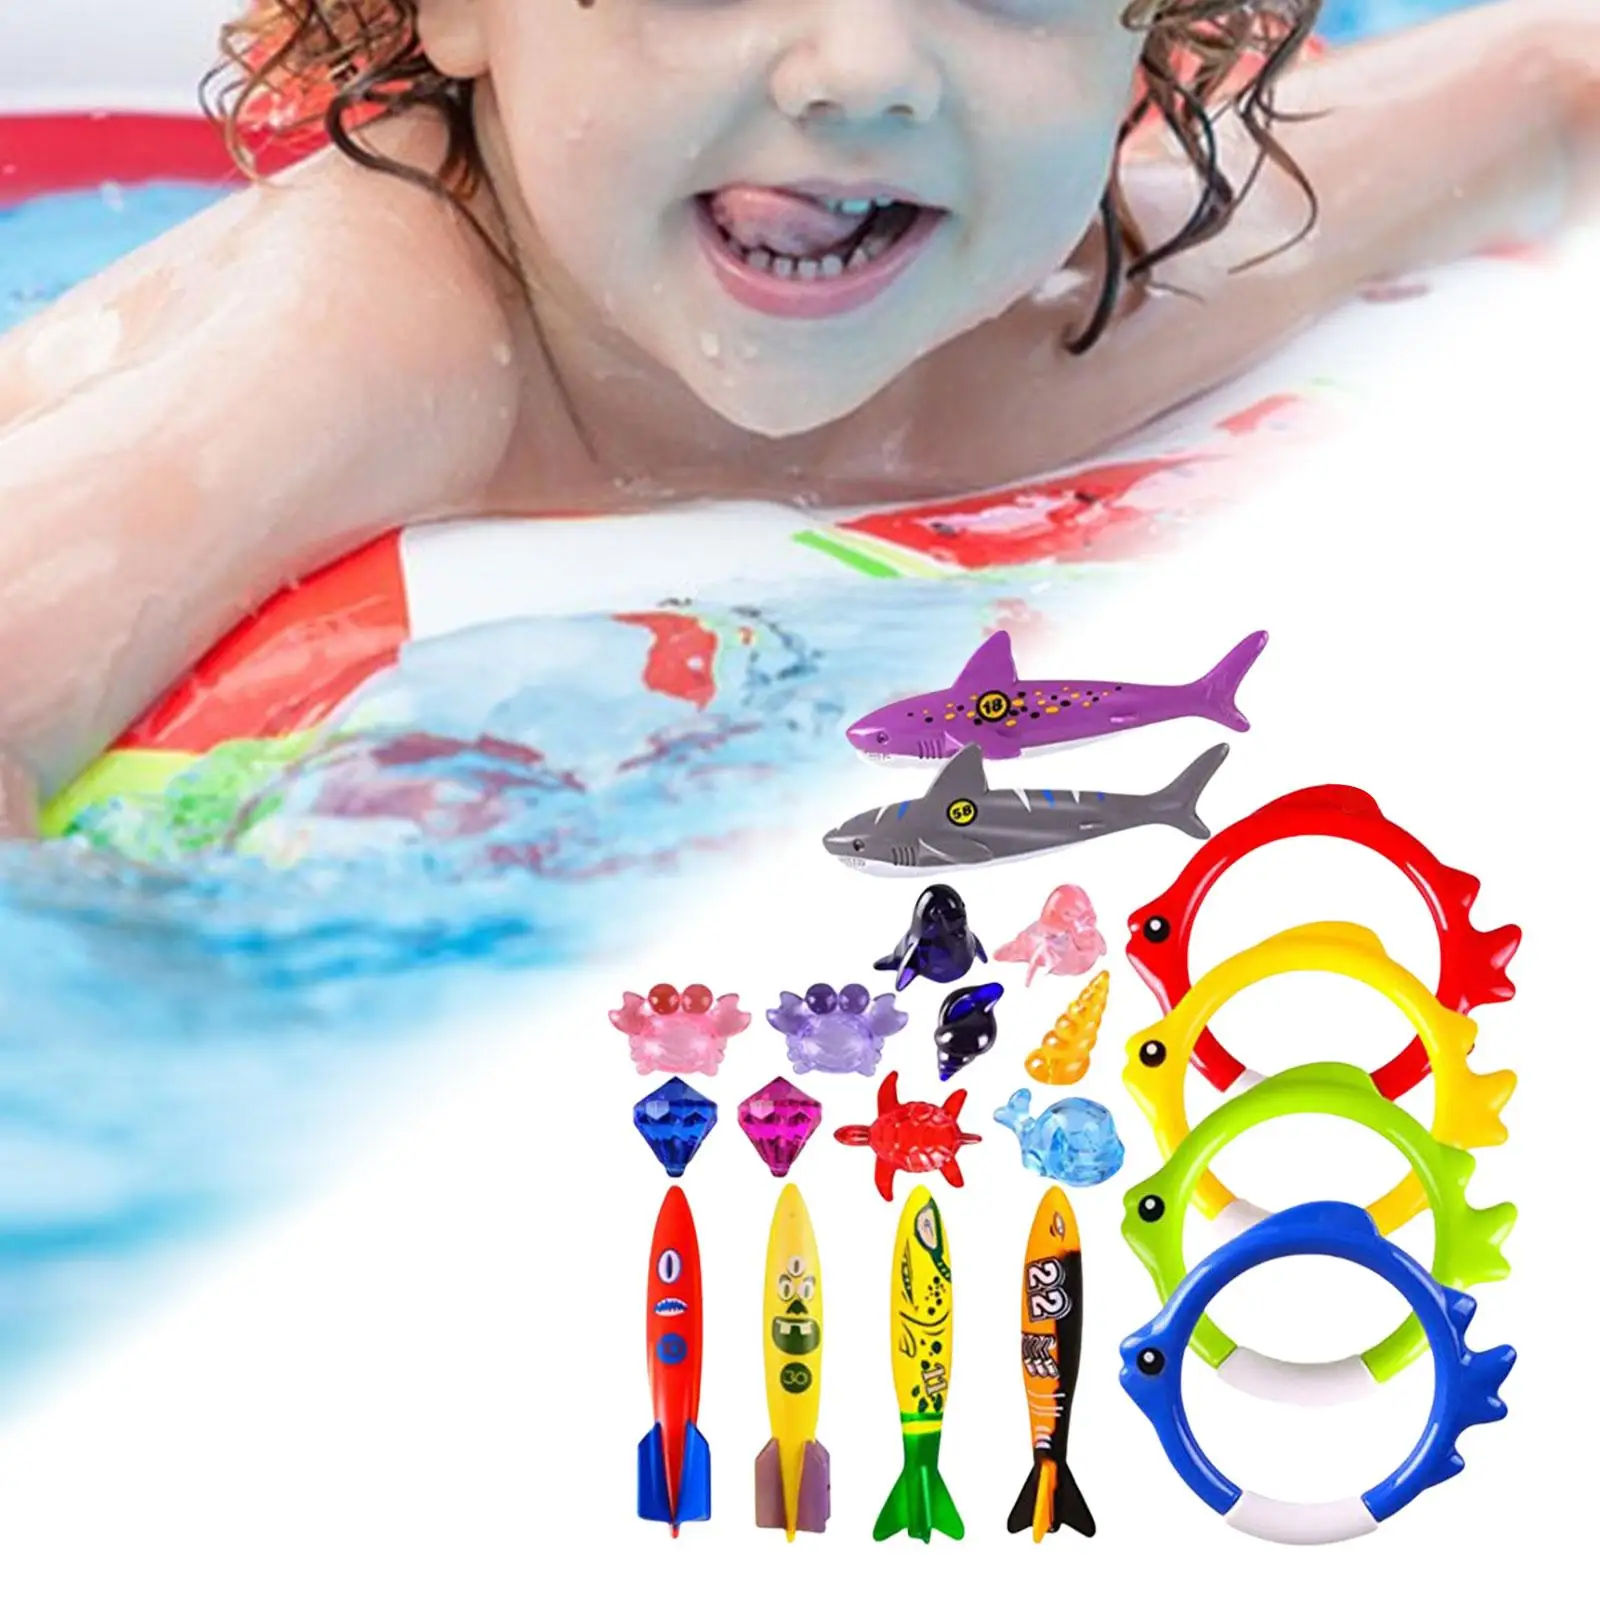 20 Pieces Toddler Pool Toys Shark Rings Summer Pool Diving Toy Underwater Swimming Pool Toys for Diving Practice Beach Kids 8-12